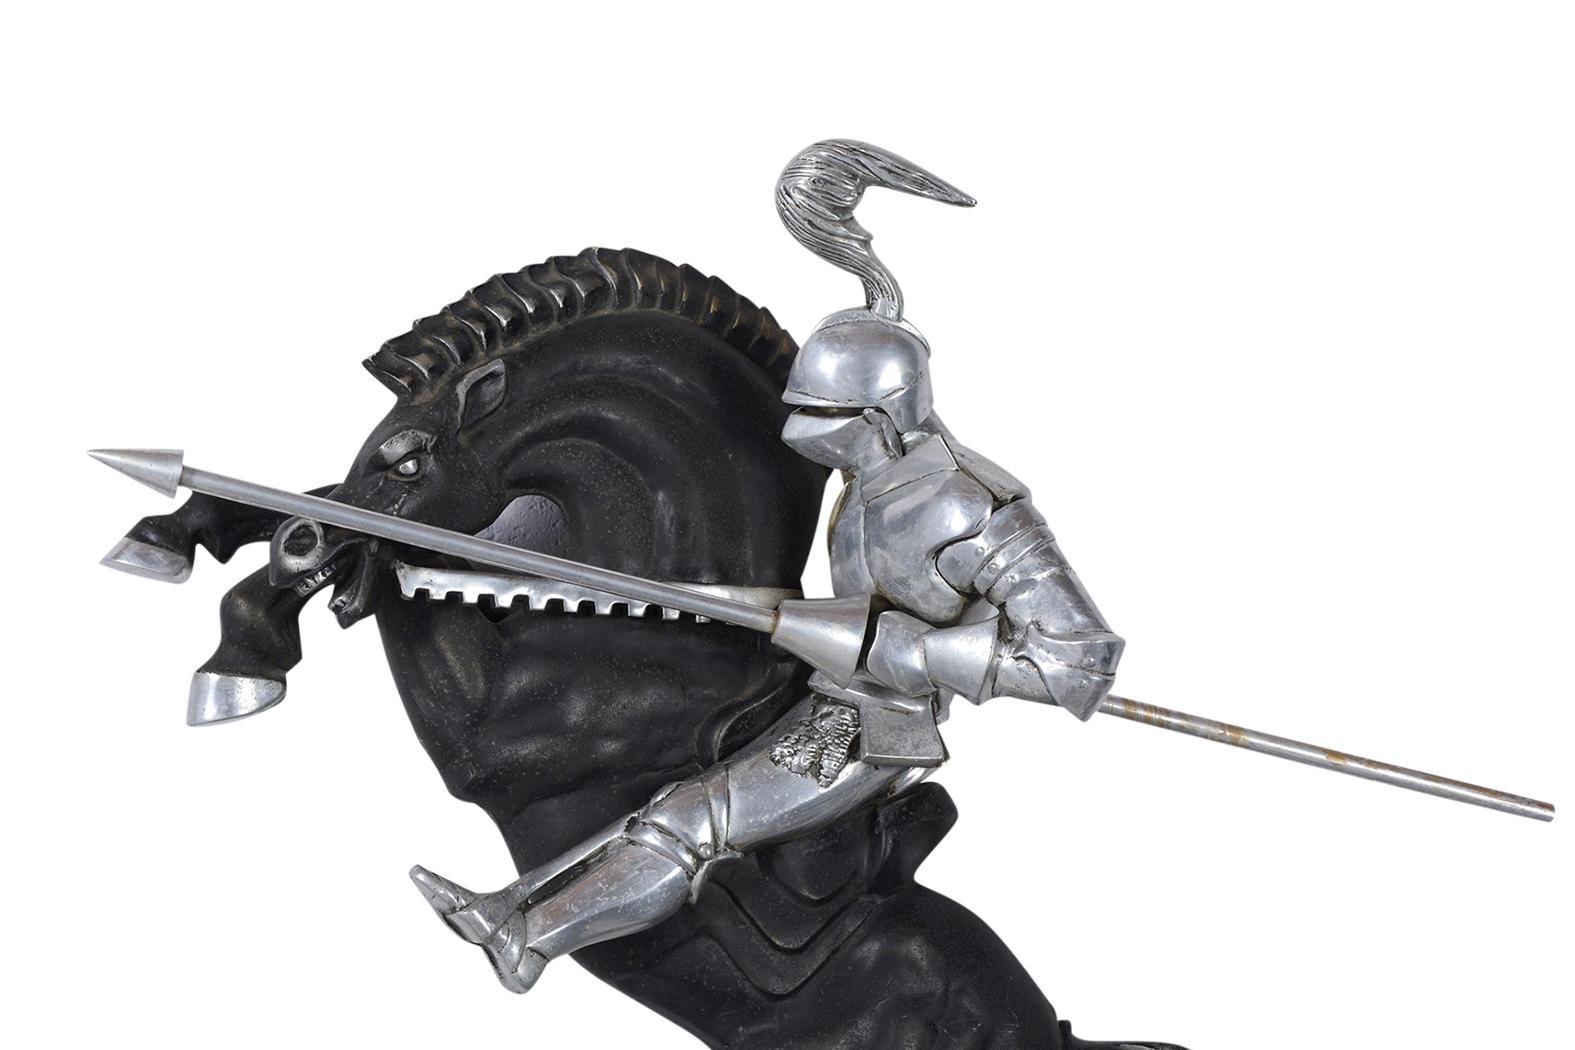 This vintage medieval lance knight wall sculpture is made out of aluminum and is in good condition. This piece features a knight and his horse in a full charging position. The horse is black painted aluminum with polished hooves and eyes, the knight